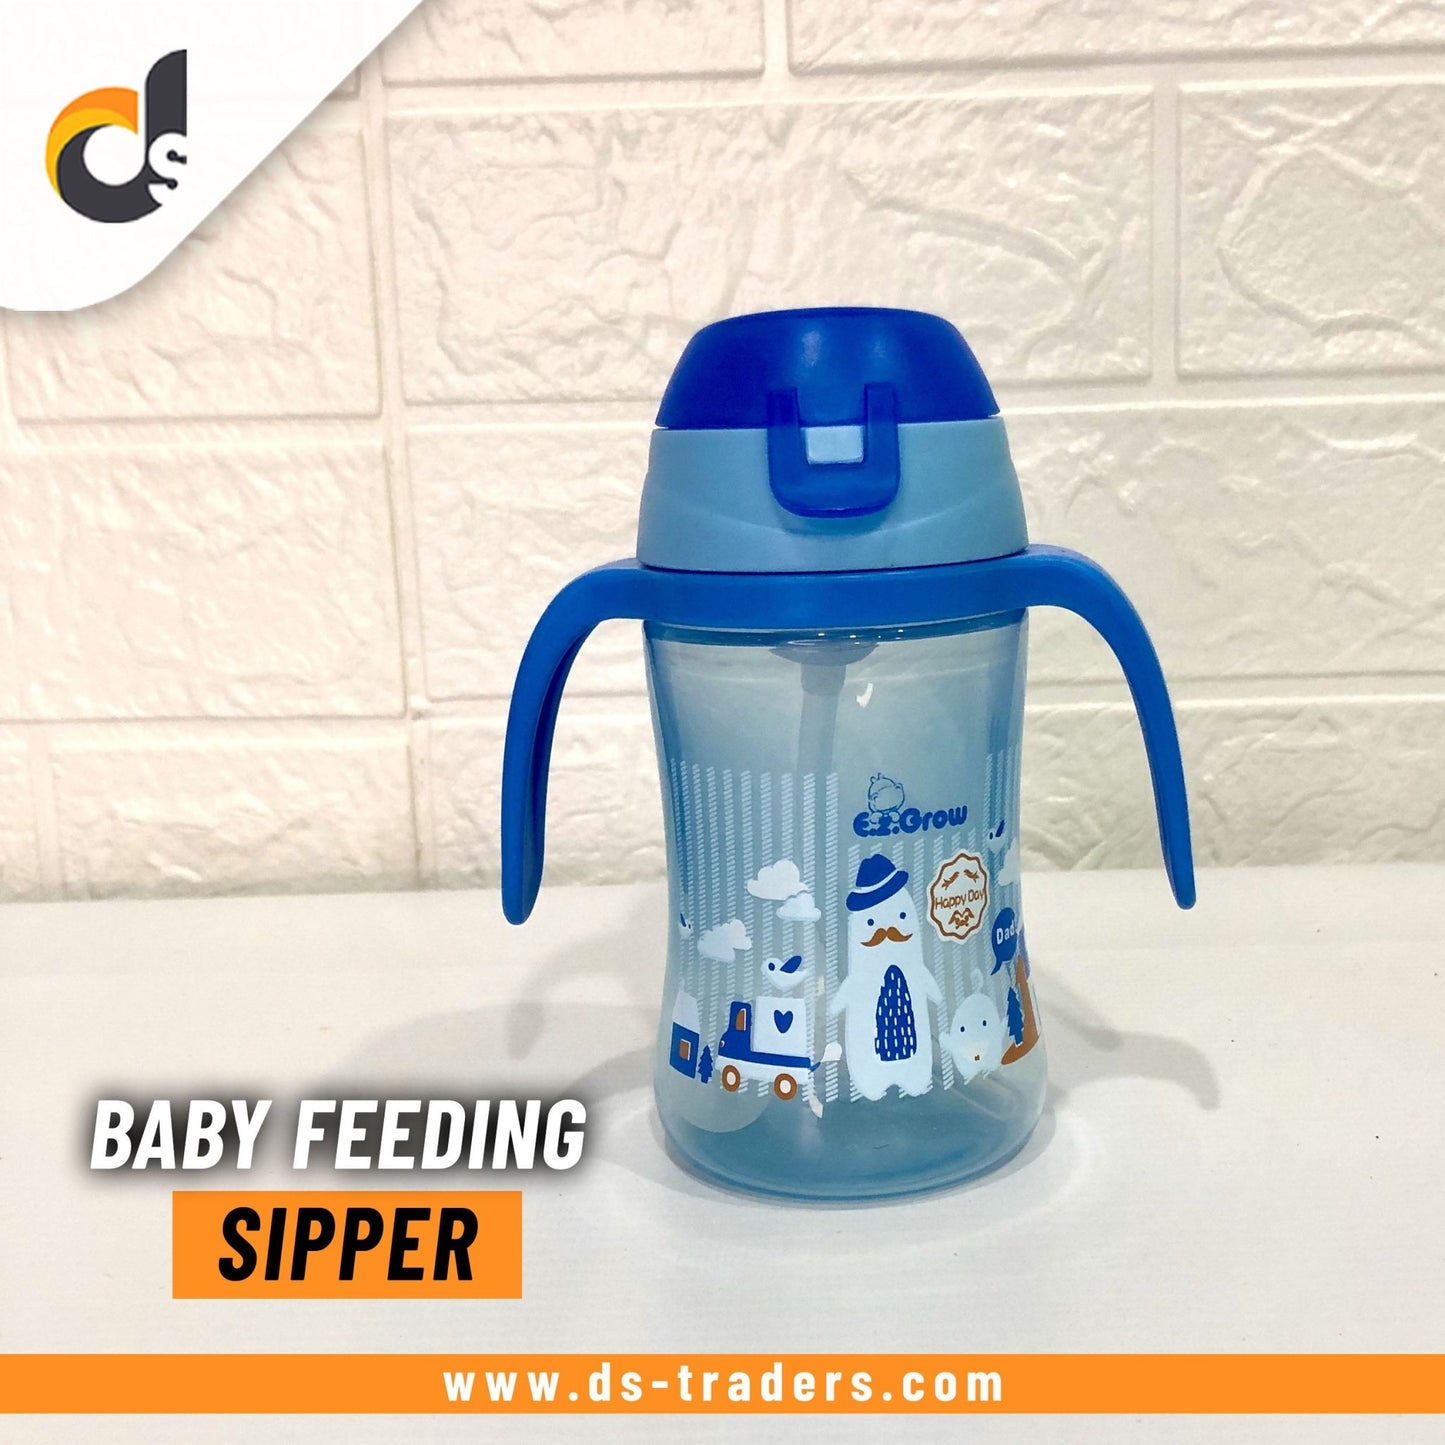 Baby Feeding Sipper - DS Traders